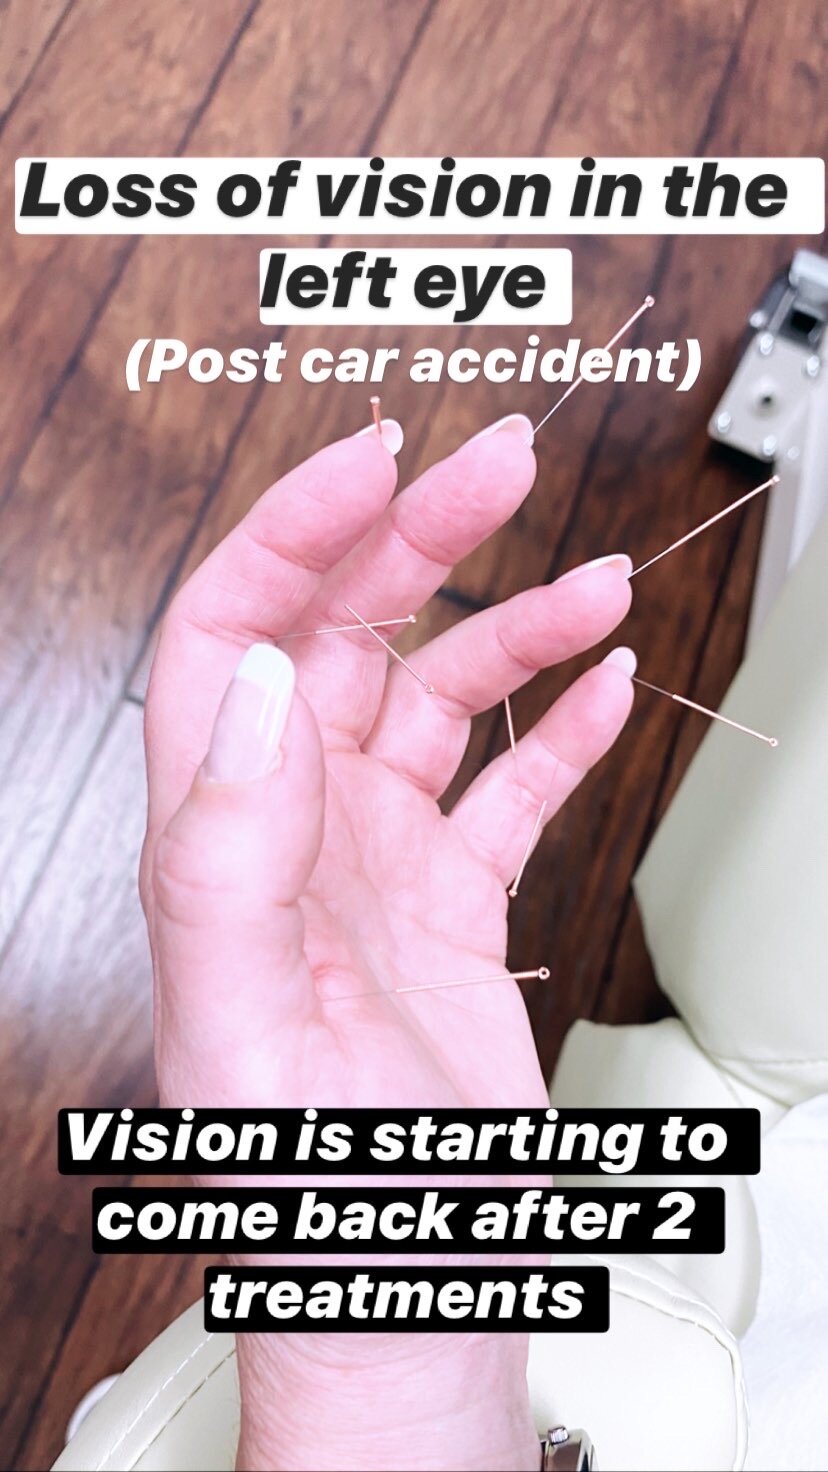  SuJok acupuncture based in vancouver at alla ozerova acupuncture clinic used as alternative to treating sensory issues and diseases. Patient was treated for loss of vision in the left eye after a car accident. Treatment resulted in vision coming bac